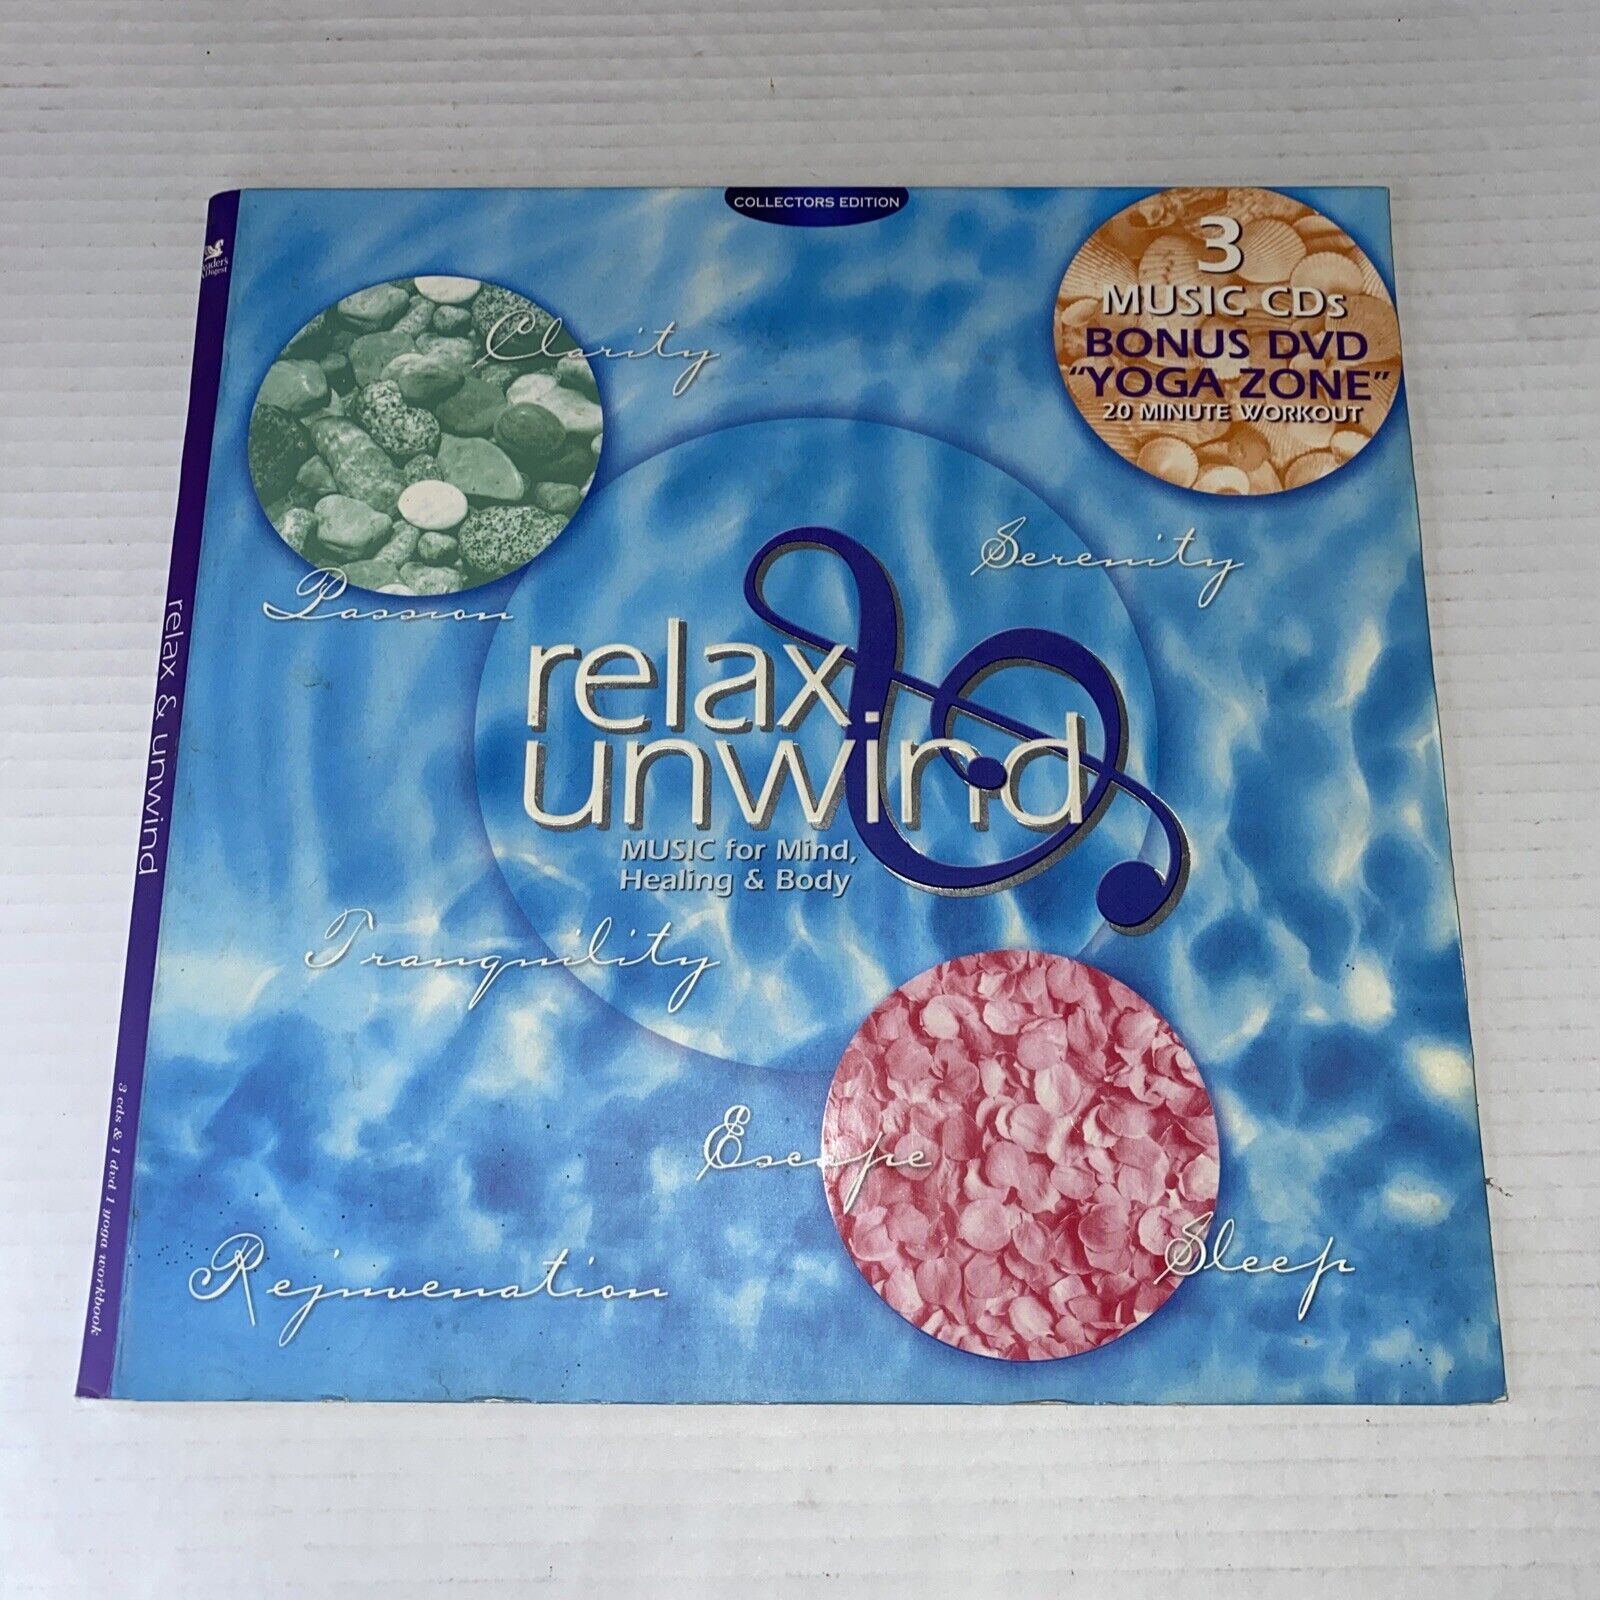 Reader's Digest Relax & Unwind 3 Music CDs Yoga Relaxation Workout NO DVD